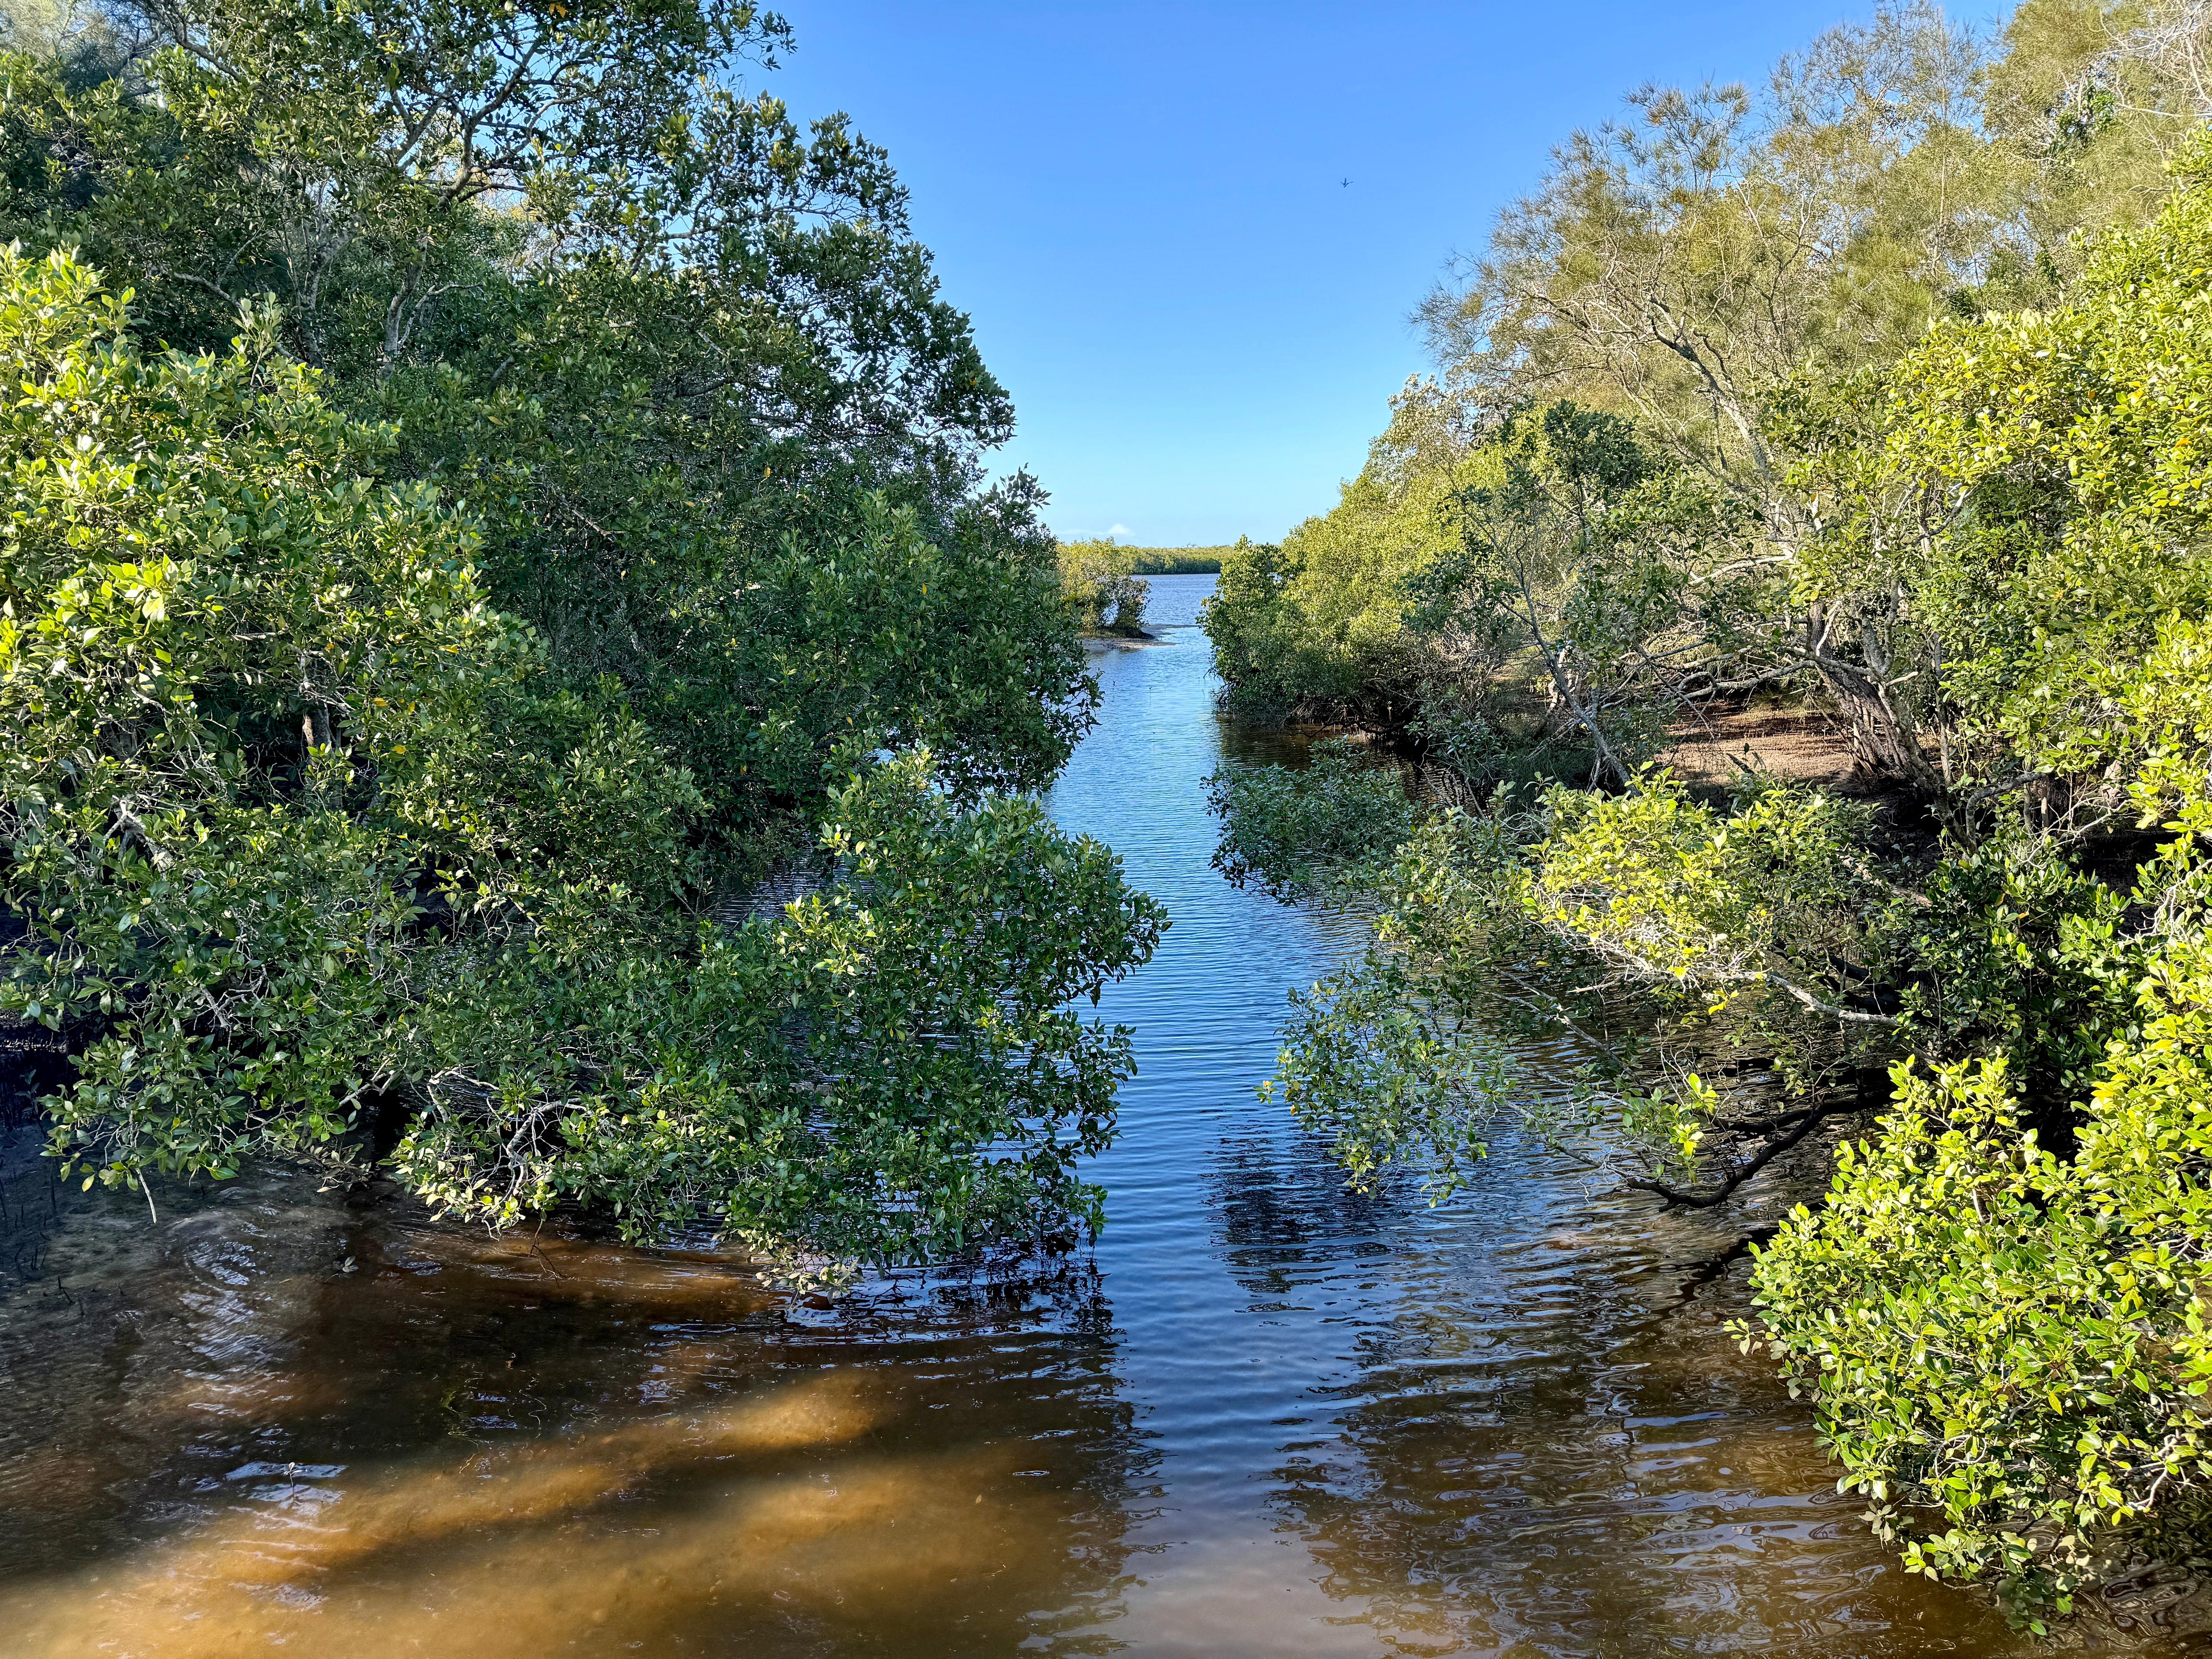 A tidal creek surrounded by mangroves.